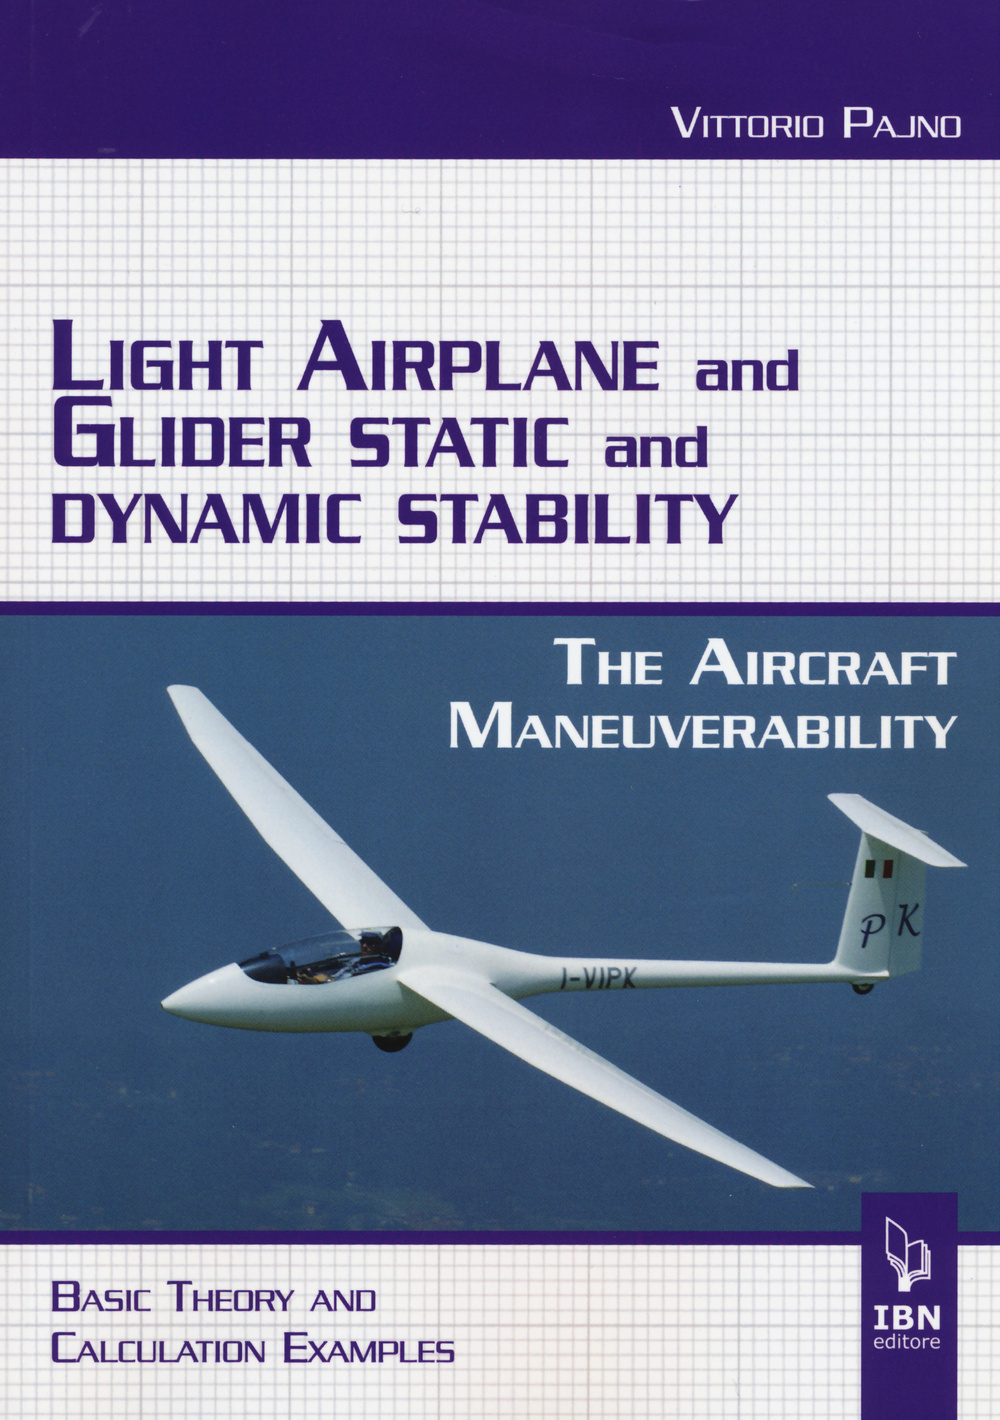 Light airplane and glider static and dynamic stability. The aircraft manoeuvrability. Basic theory and calculation examples